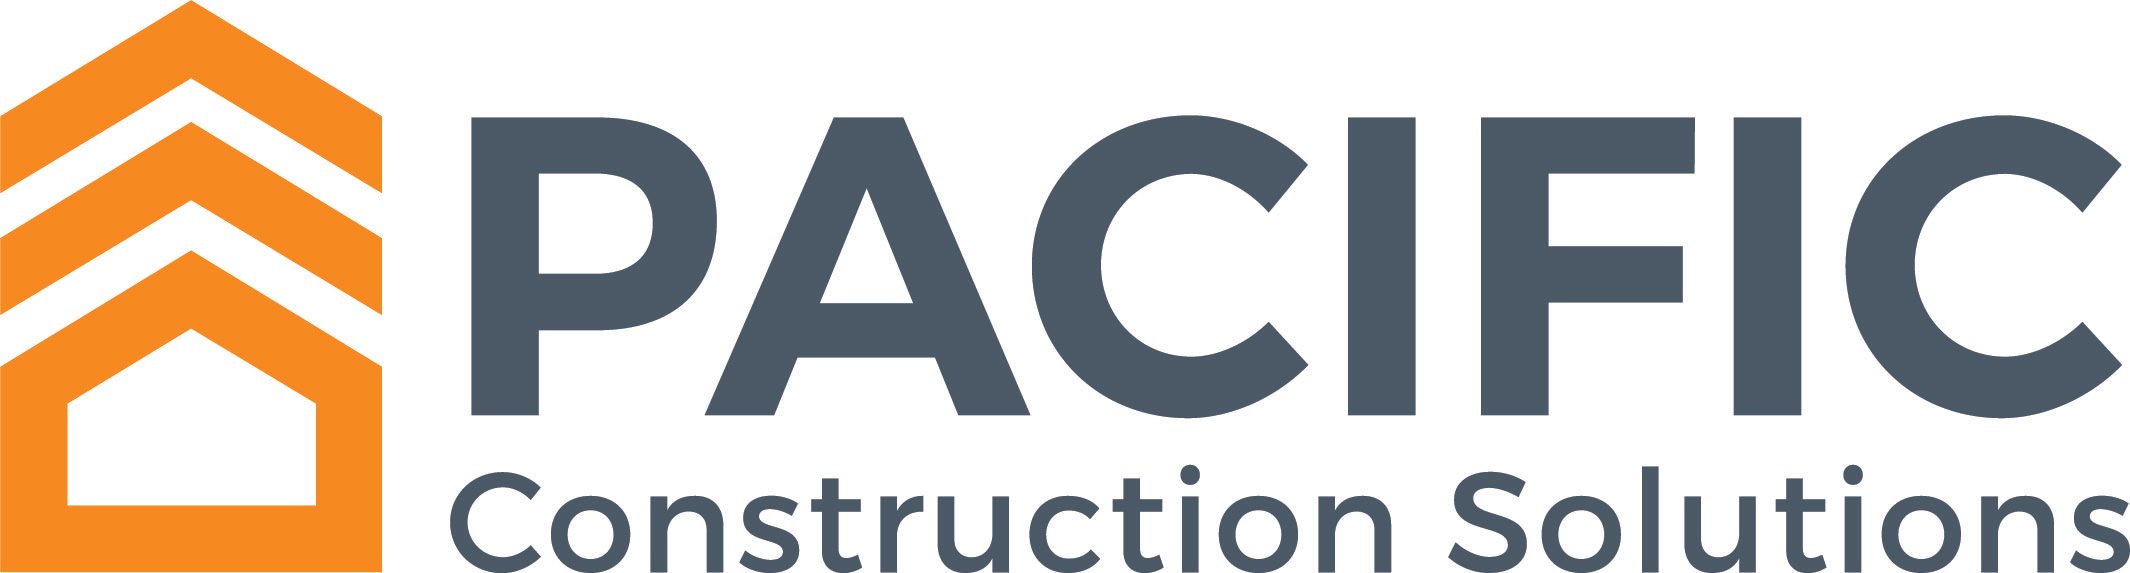 Pacific Construction Solutions, Inc. Logo